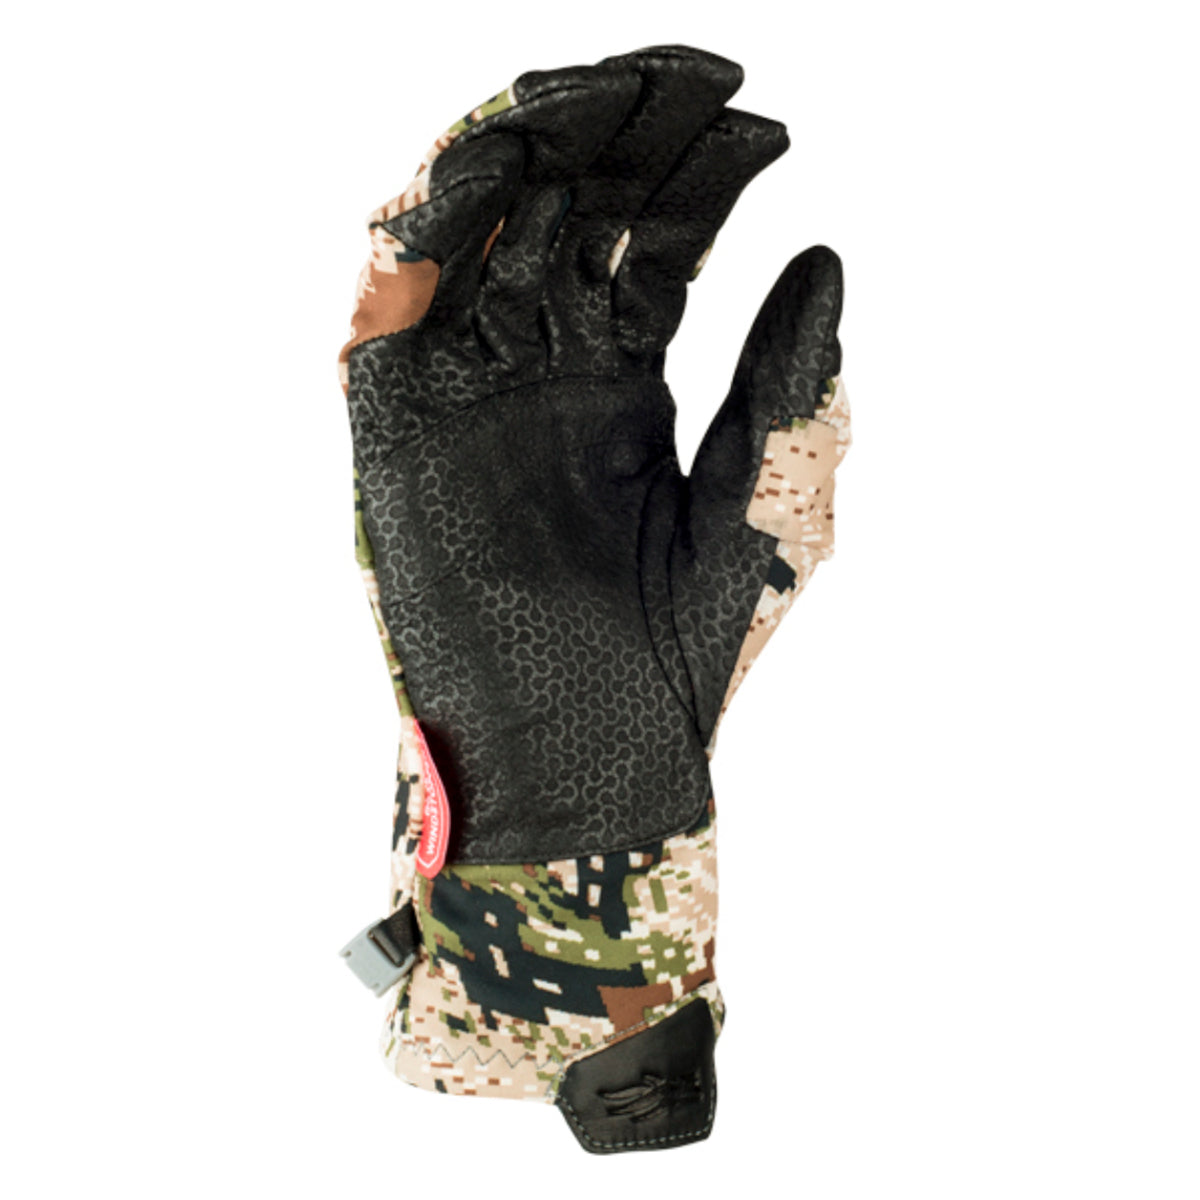 Sitka Mountain Glove in  by GOHUNT | Sitka - GOHUNT Shop